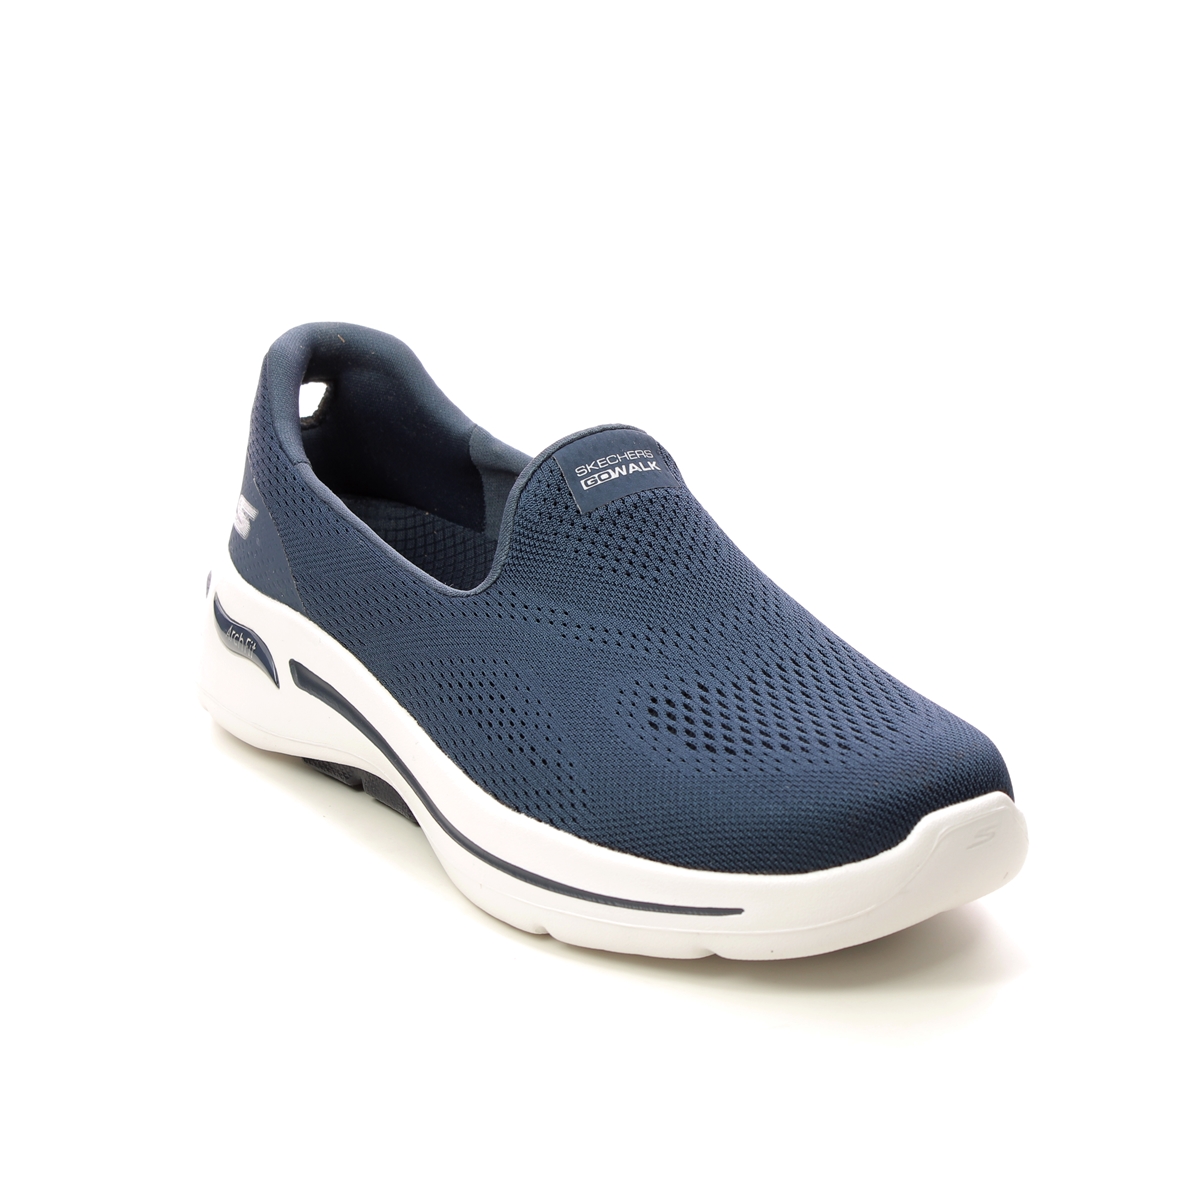 Skechers Arch Fit Go Walk Slip On NVY Navy Womens trainers 124483 in a Plain Textile in Size 5.5